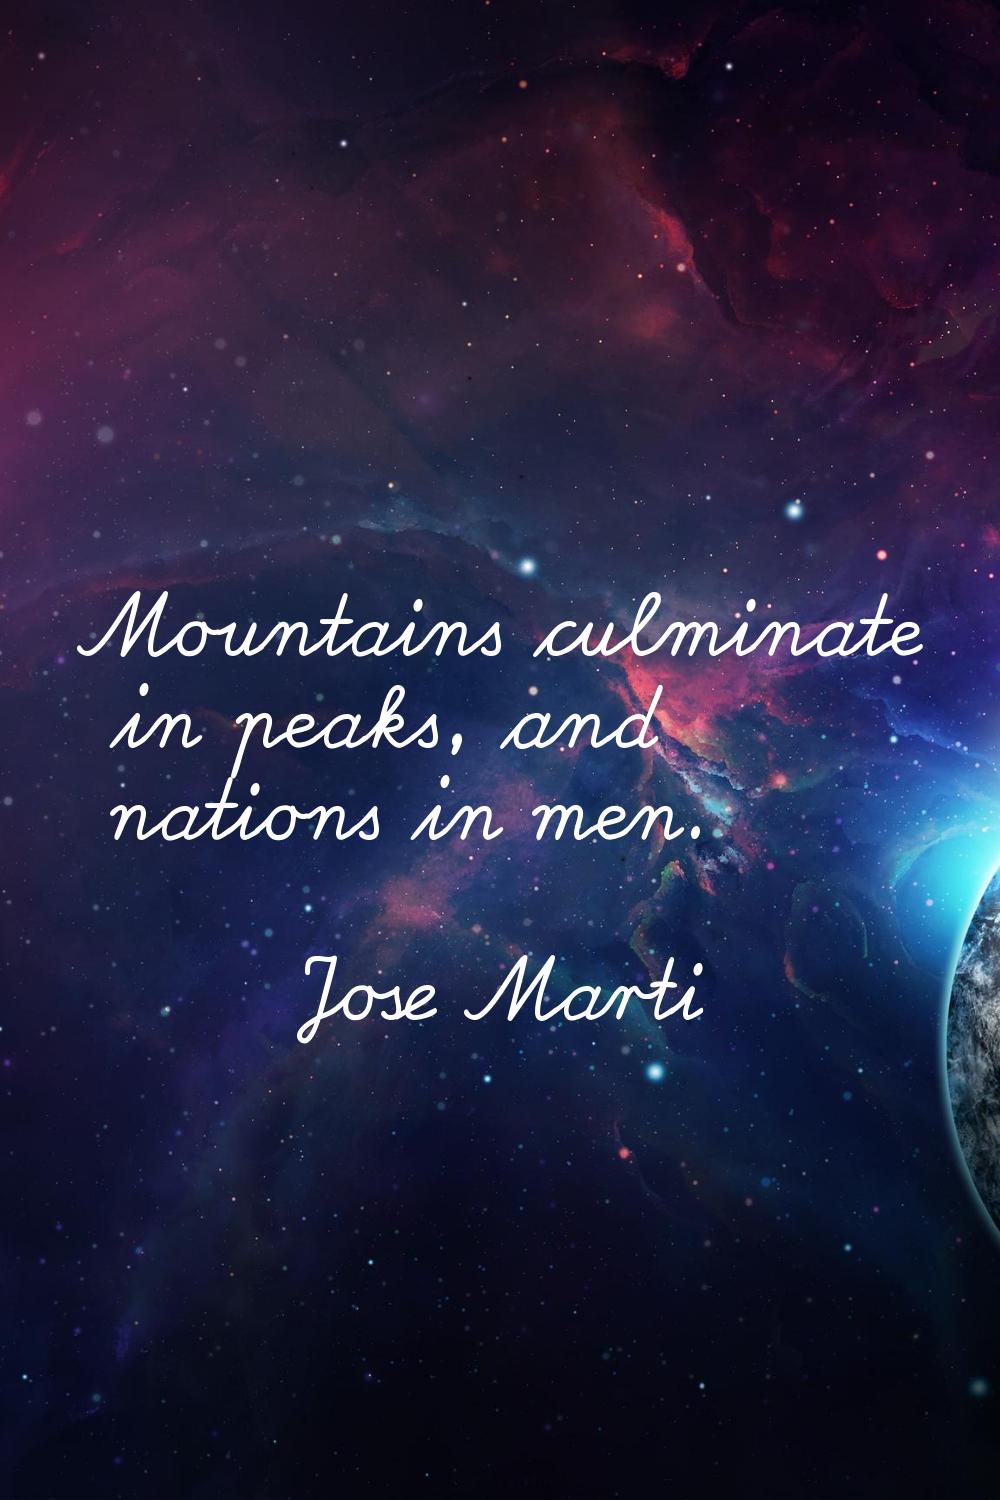 Mountains culminate in peaks, and nations in men.